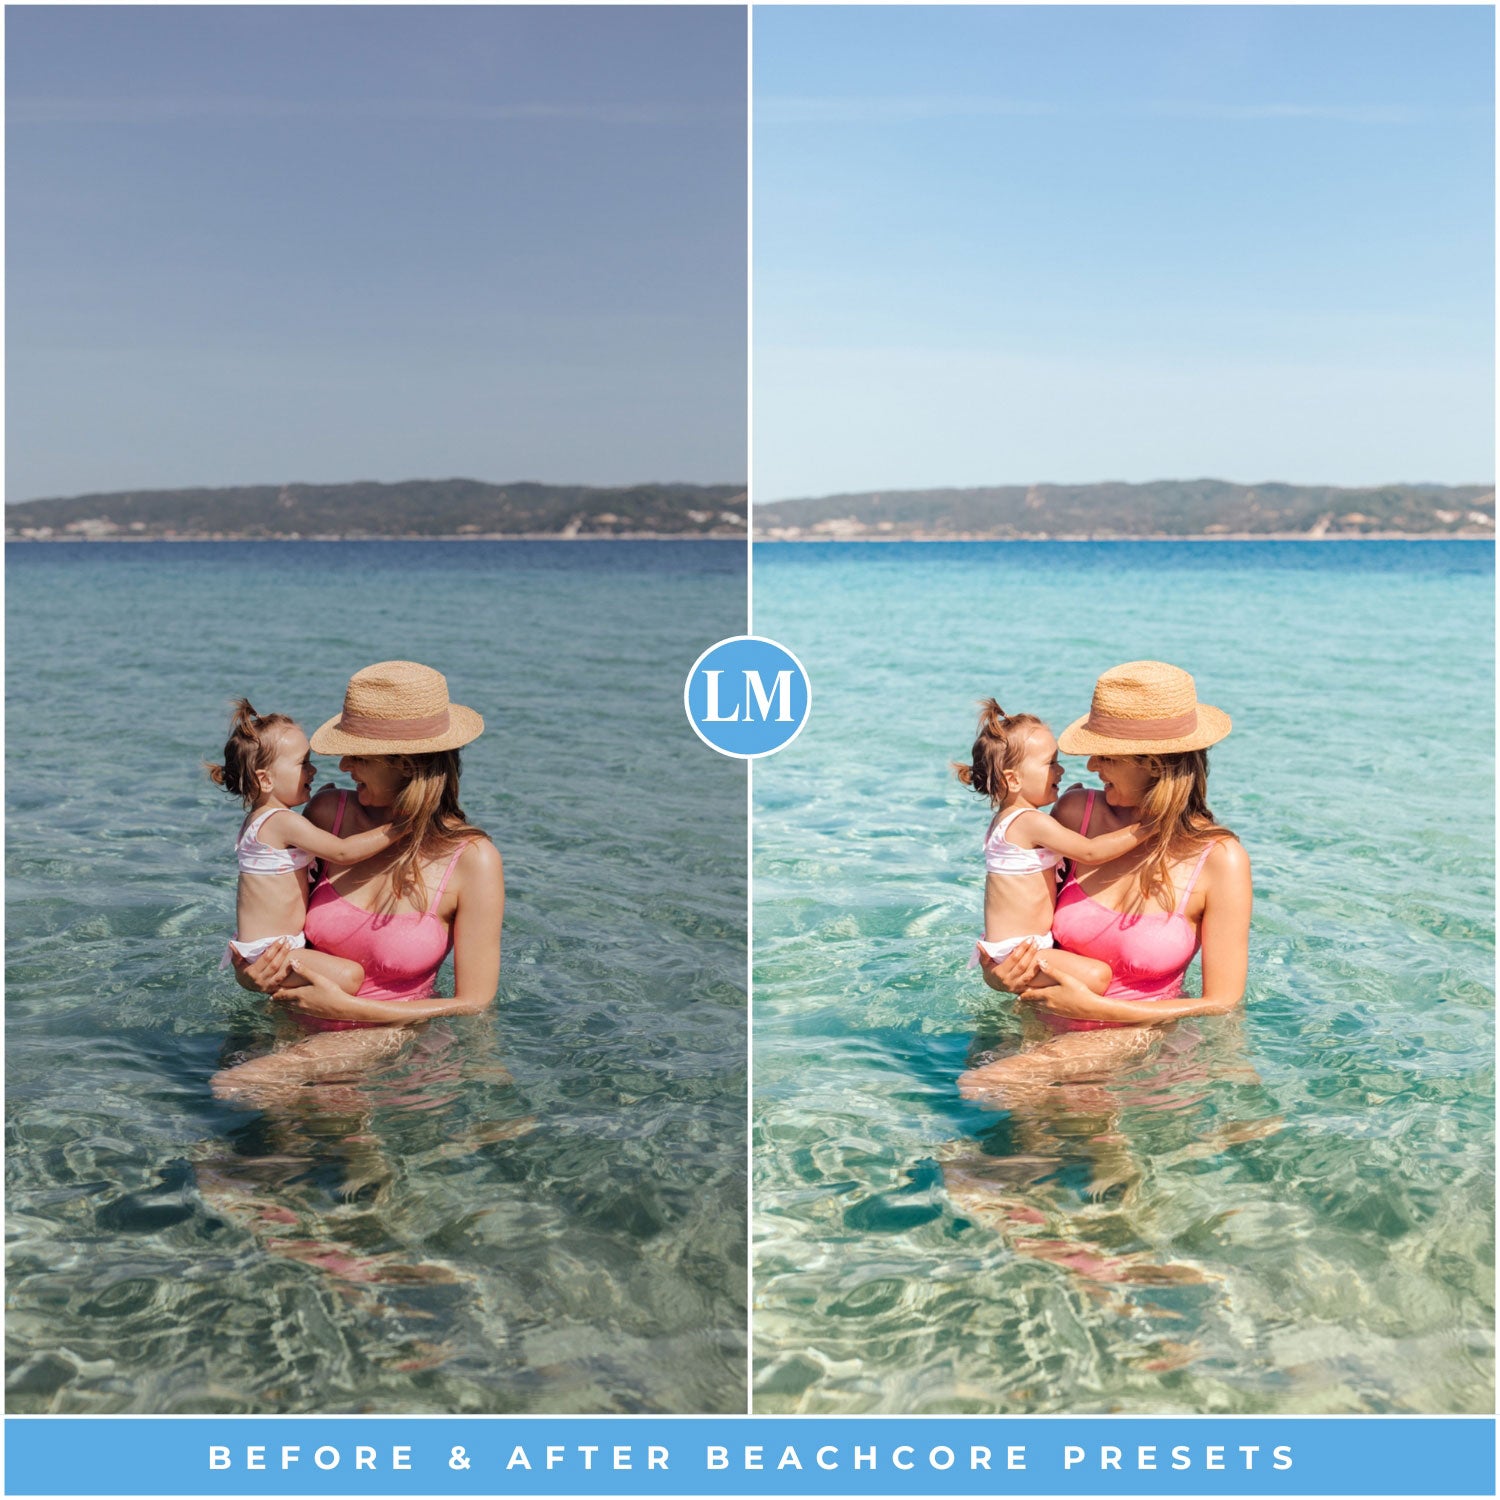 Family Beachcore Beach Lightroom Presets The Best Photo Editing Preset Filters For Lightroom Mobile And Desktop For Photographers and Instagram Influencers By Lou And Marks Presets